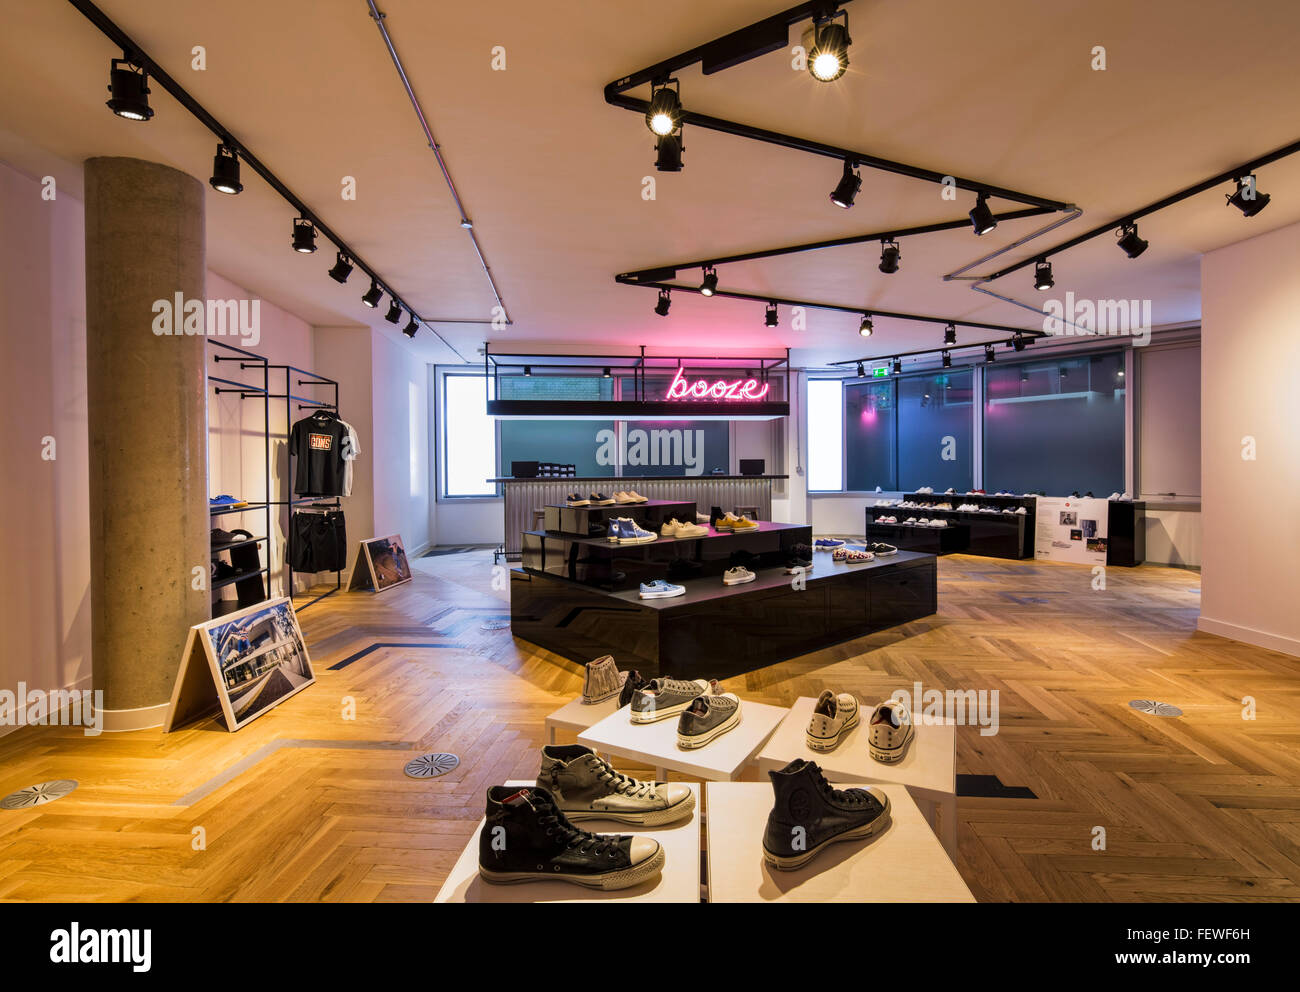 Converse offices and showroom in London. Showroom with bar. Converse  Showroom, London, United Kingdom. Architect: n/a, 2015 Stock Photo - Alamy